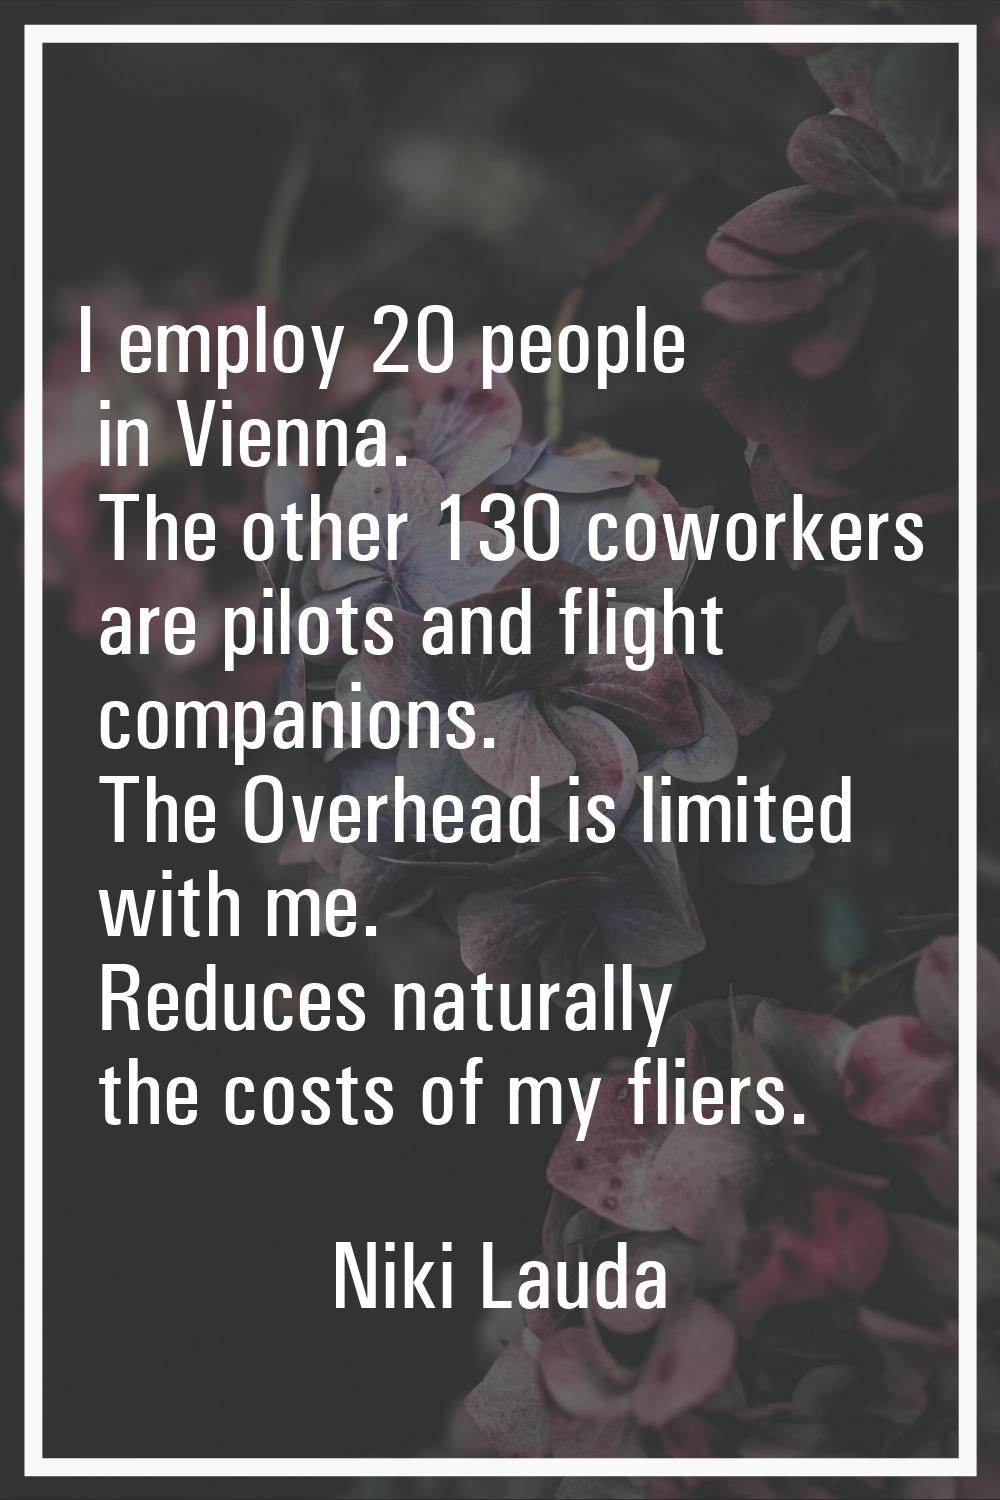 I employ 20 people in Vienna. The other 130 coworkers are pilots and flight companions. The Overhea